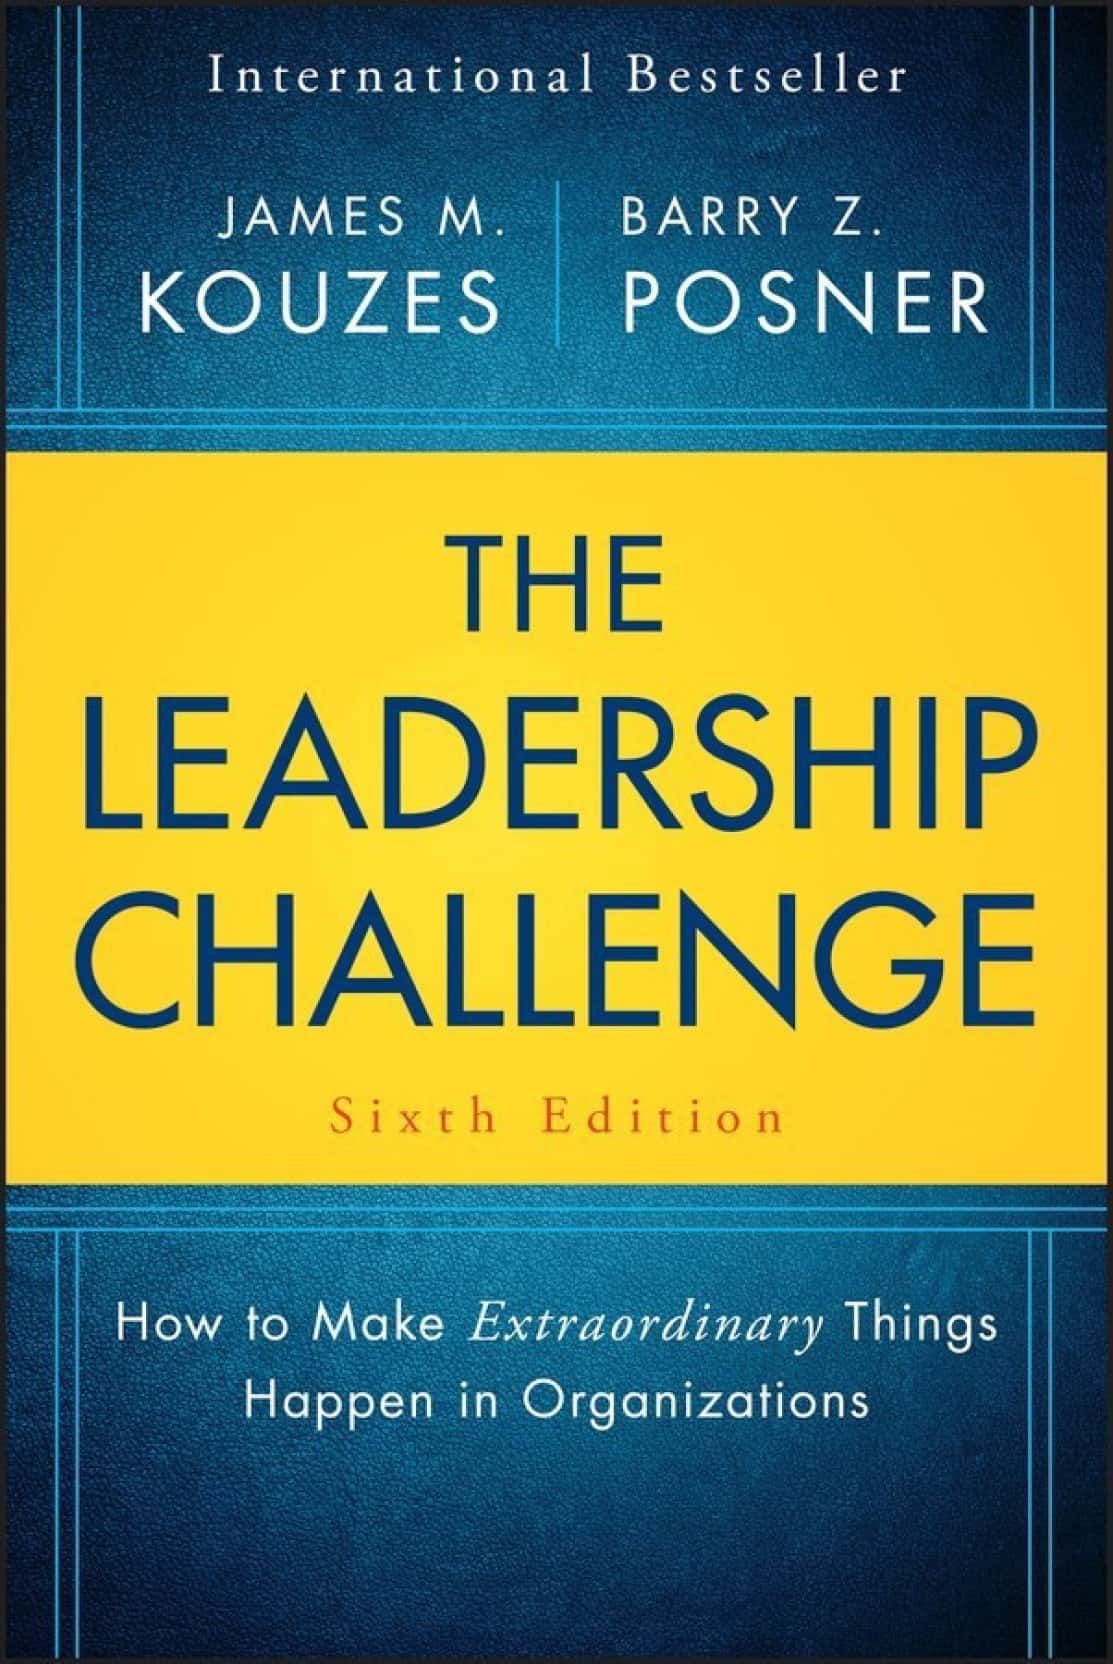 20 Best Management Books That Will Make You a Great Leader